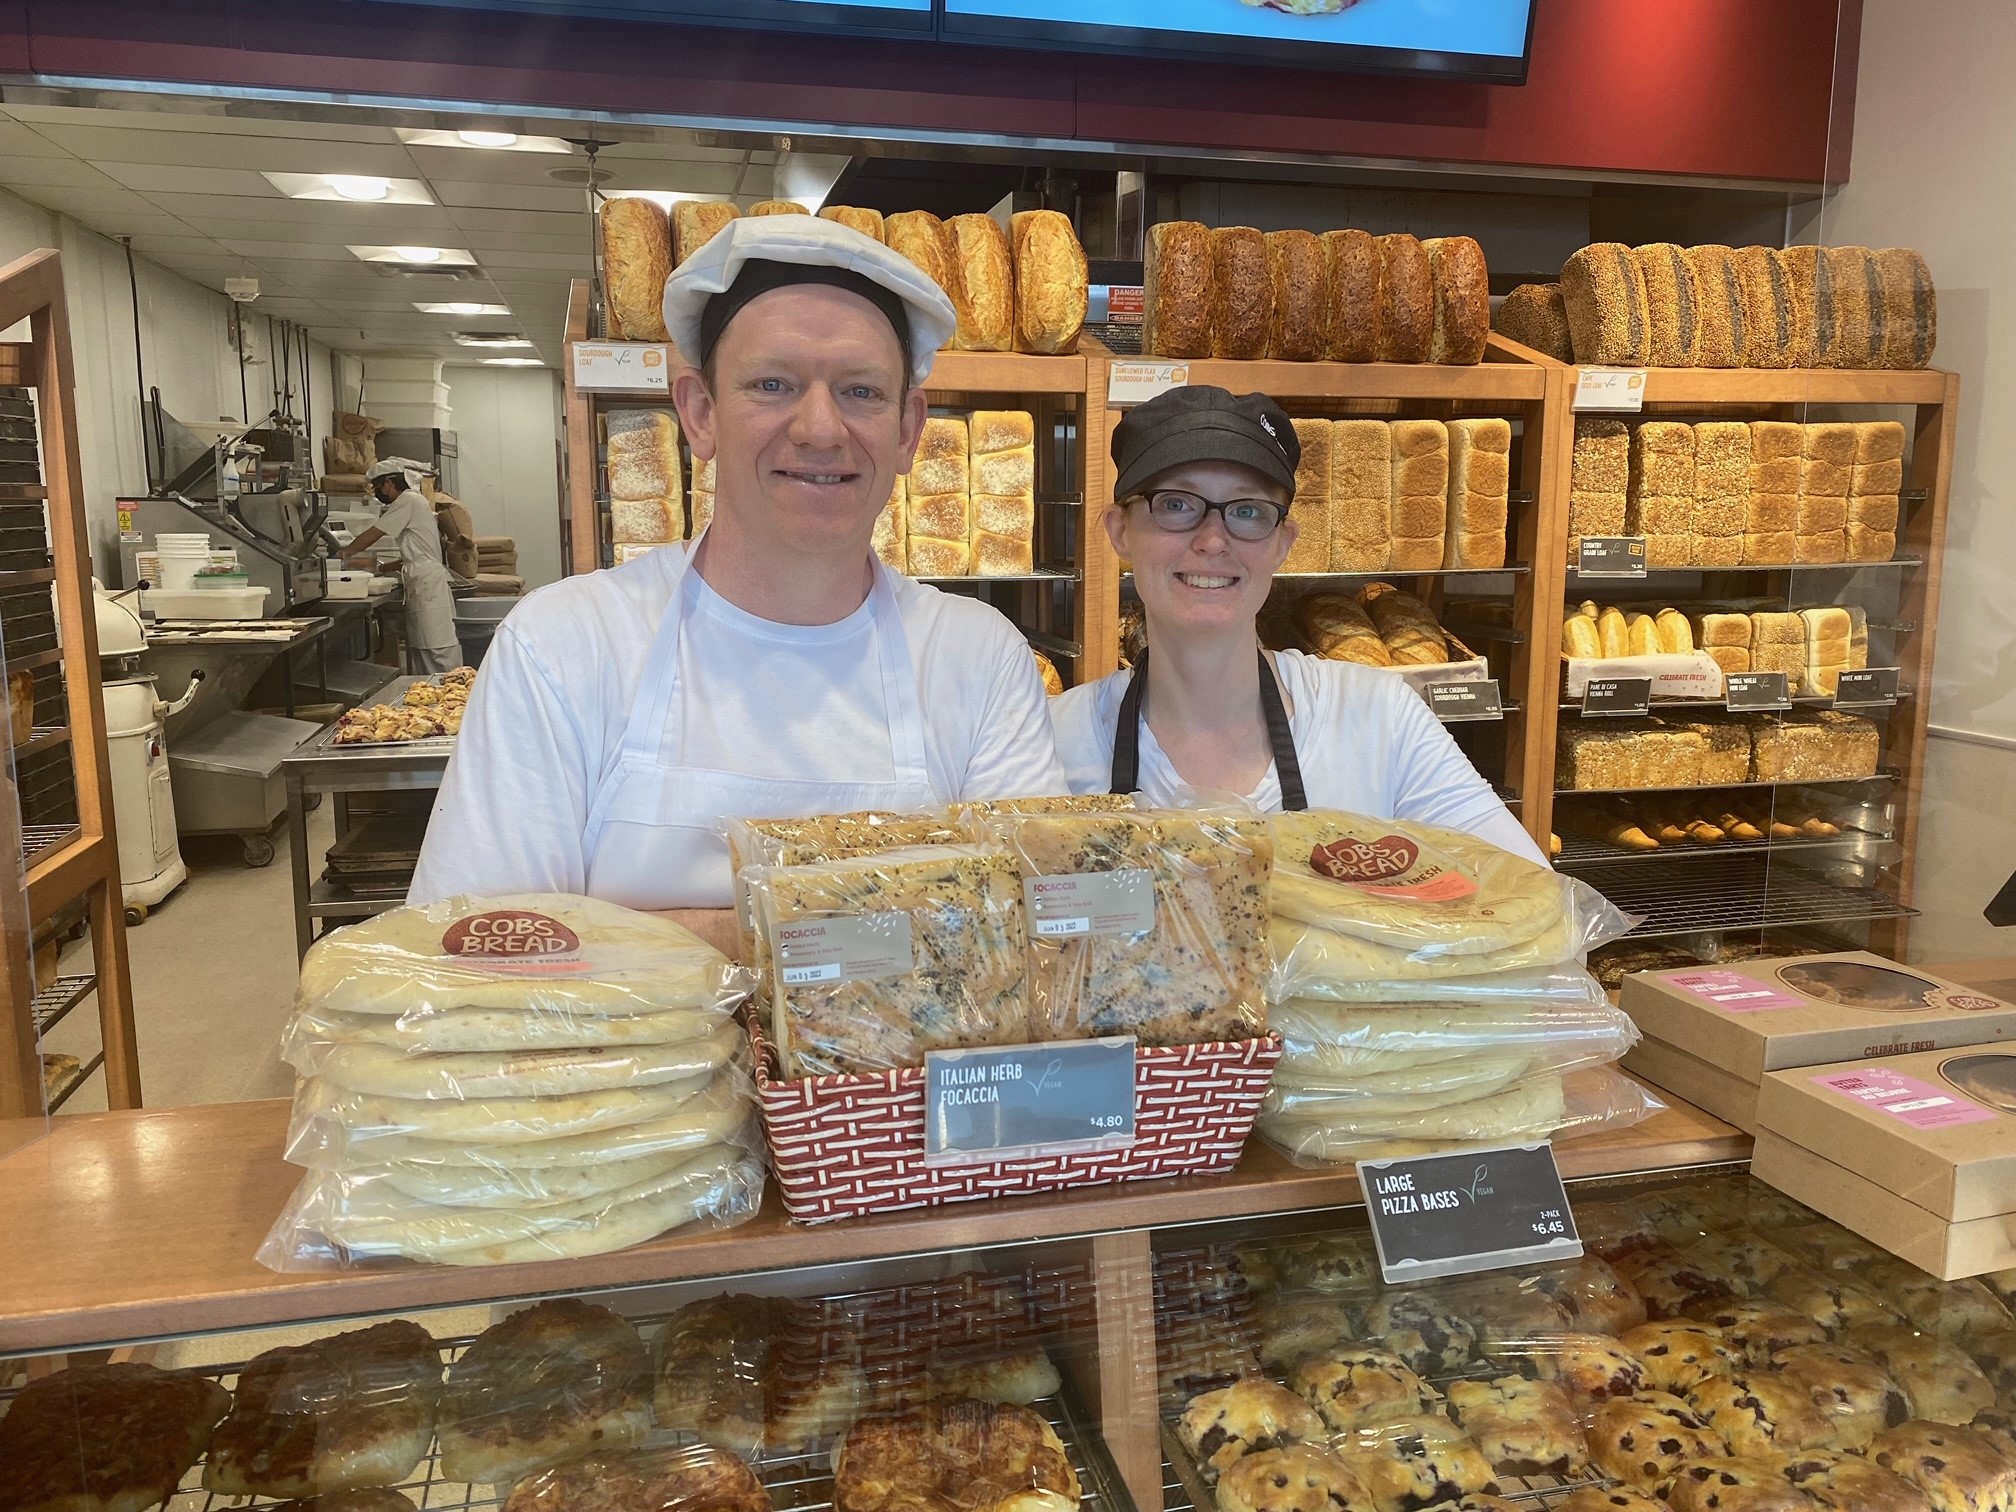 Charitable donations baked into COBS Bread's business plans - Richmond News